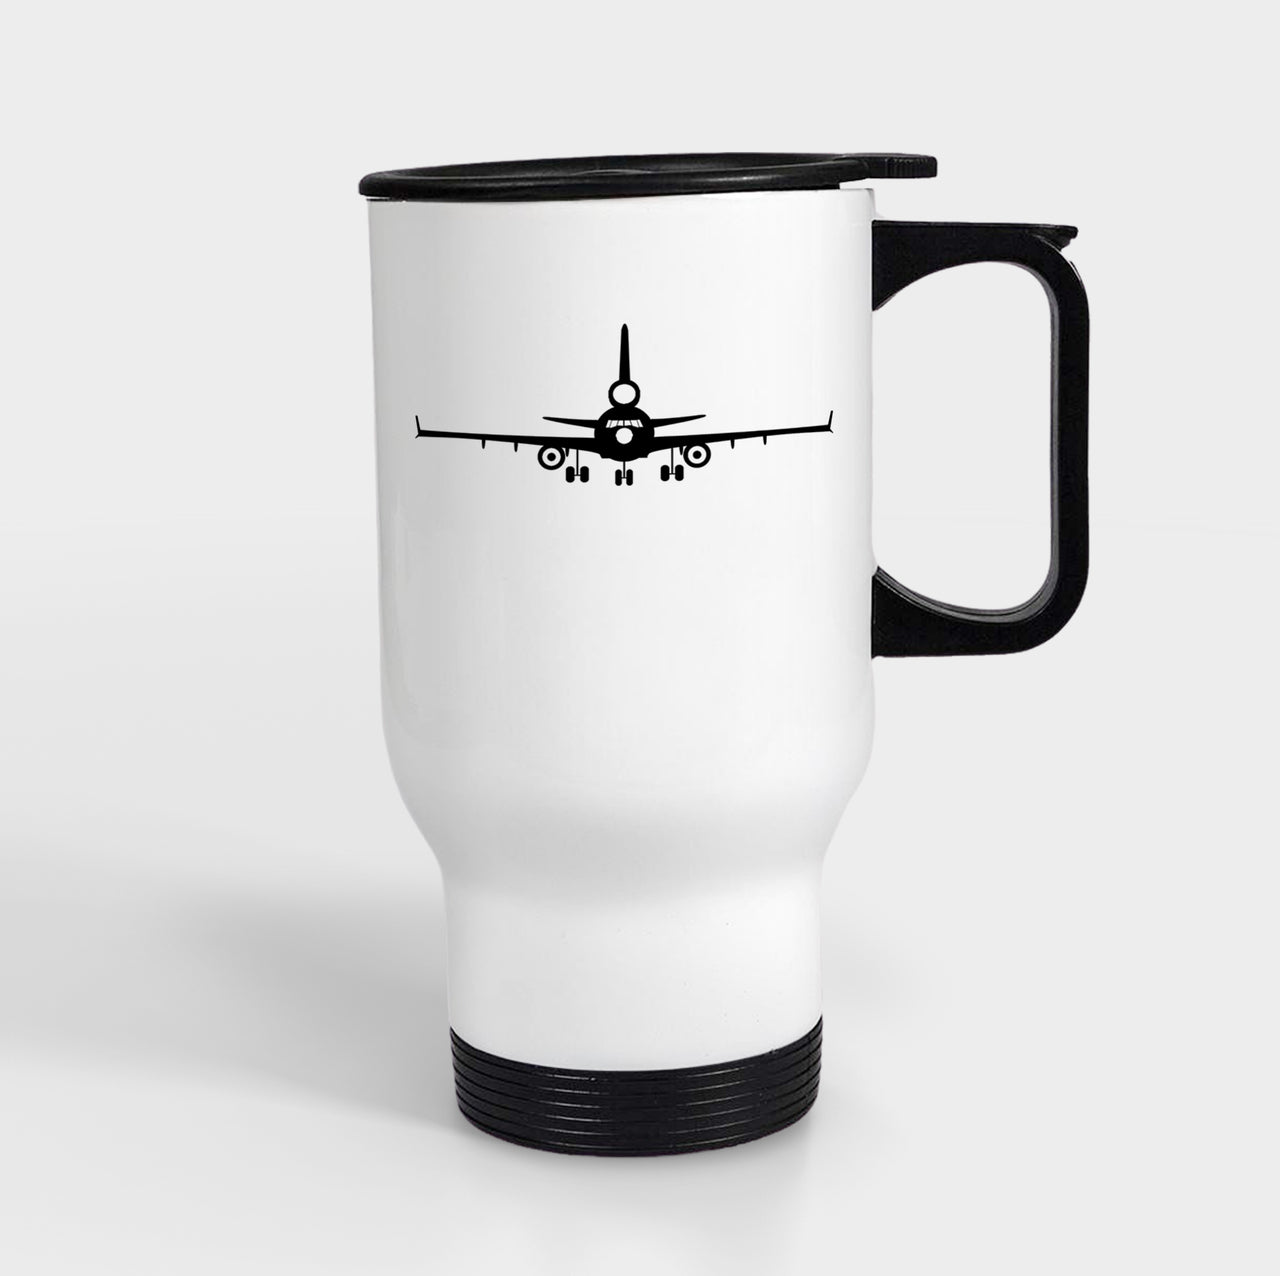 McDonnell Douglas MD-11 Silhouette Designed Travel Mugs (With Holder)